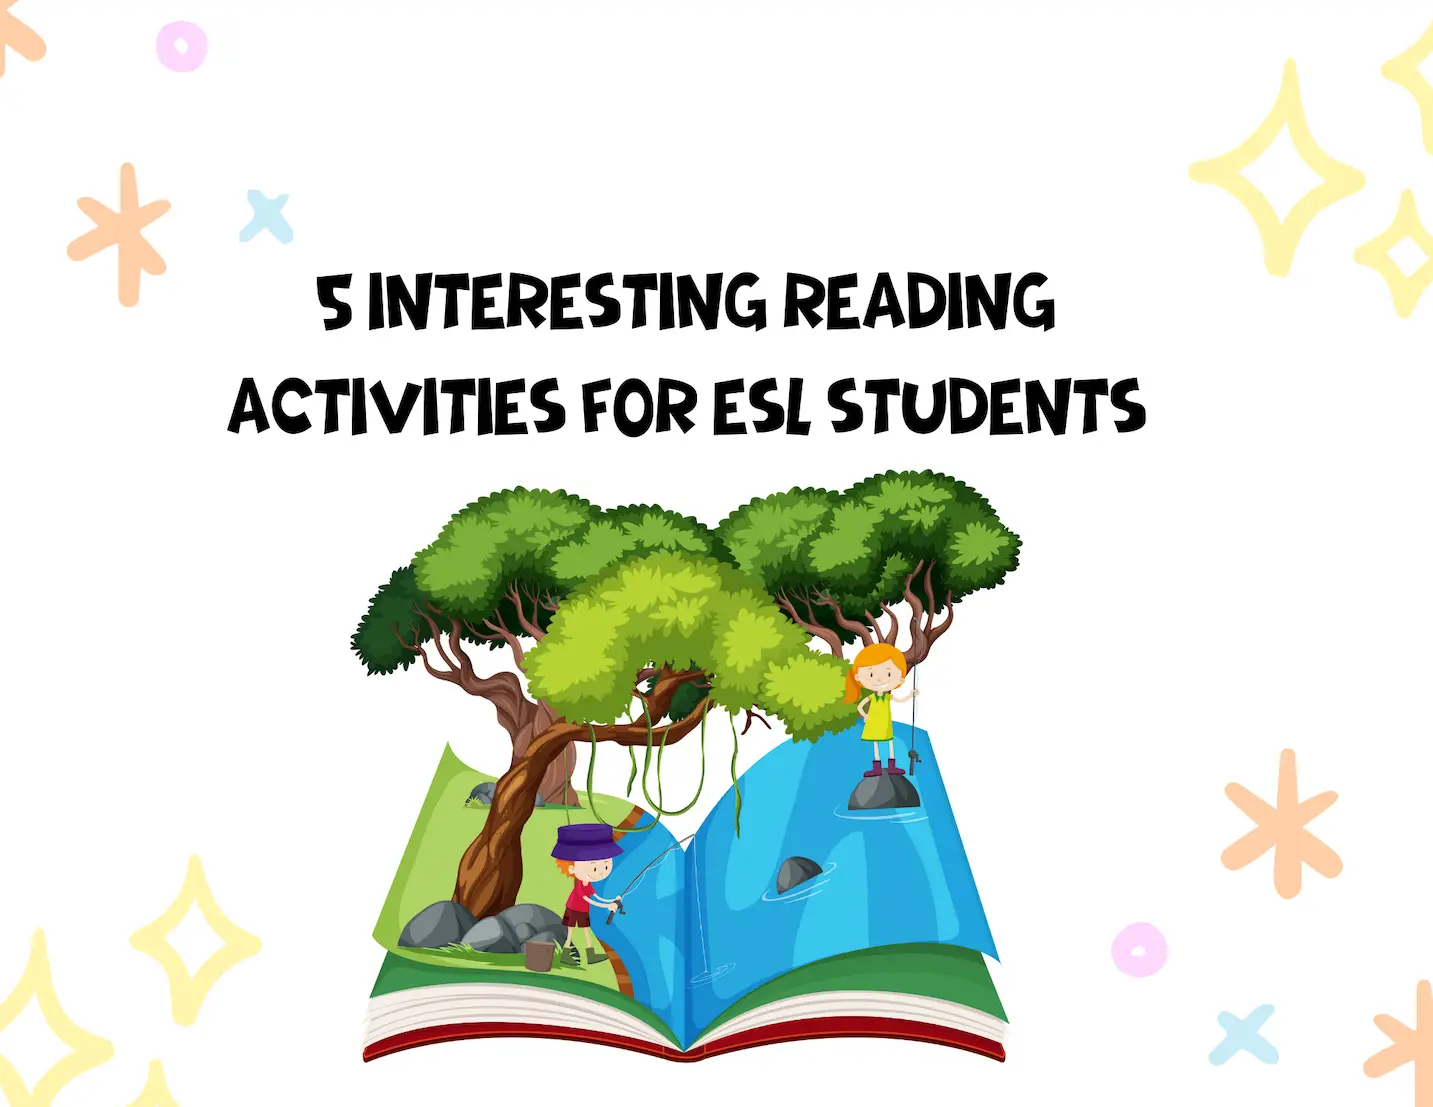 Interesting Reading Activities for ESL students